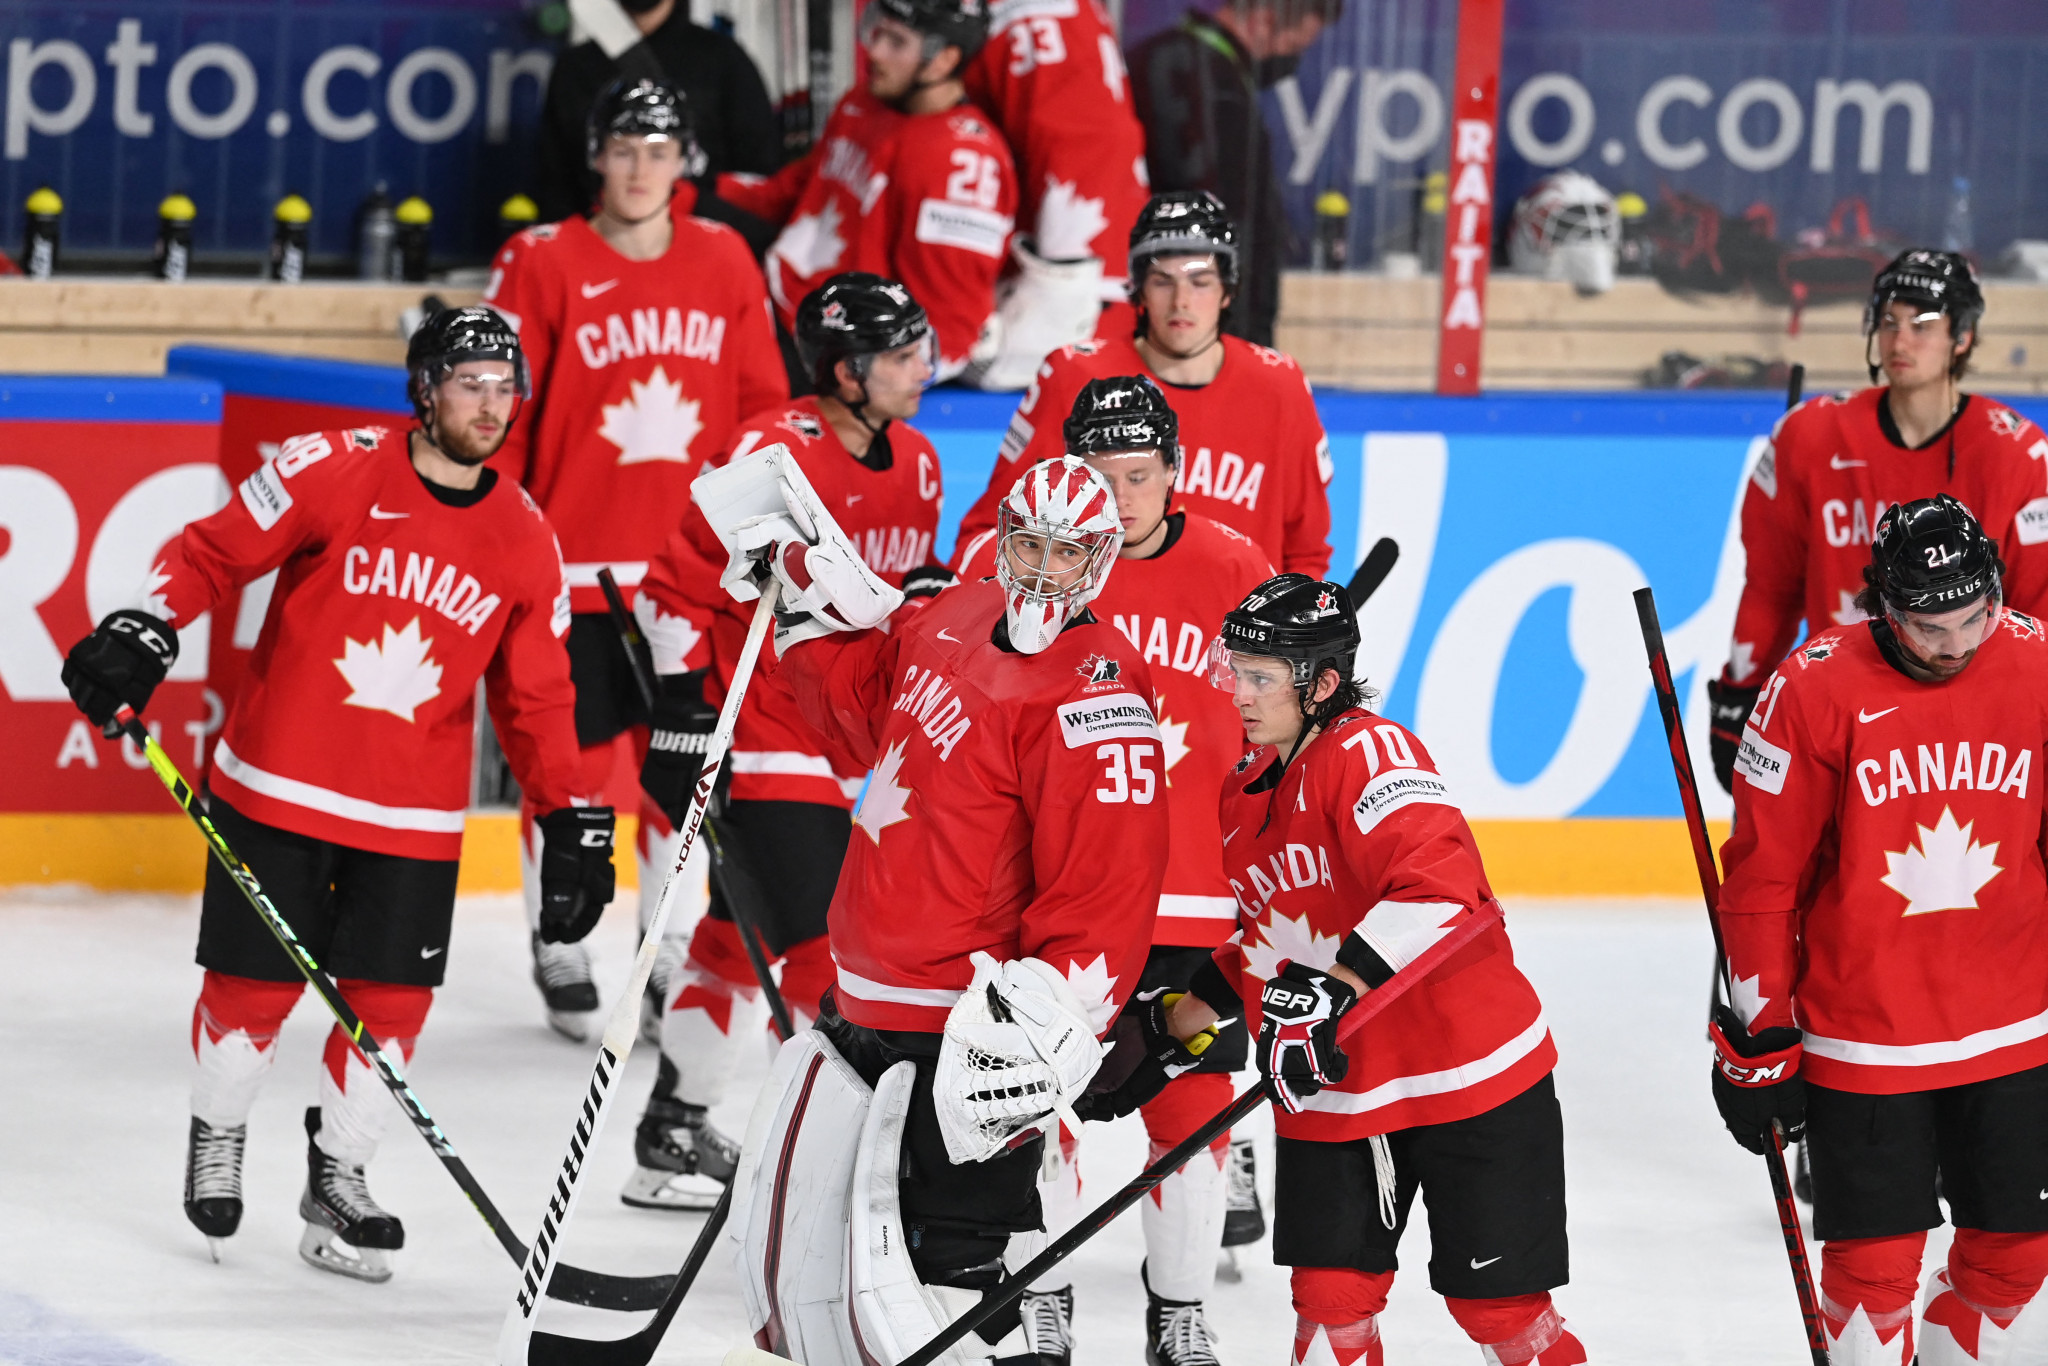 Canada squeezed through to the last eight thanks to holding the superior head-to-head record versus Kazakhstan ©Getty Images